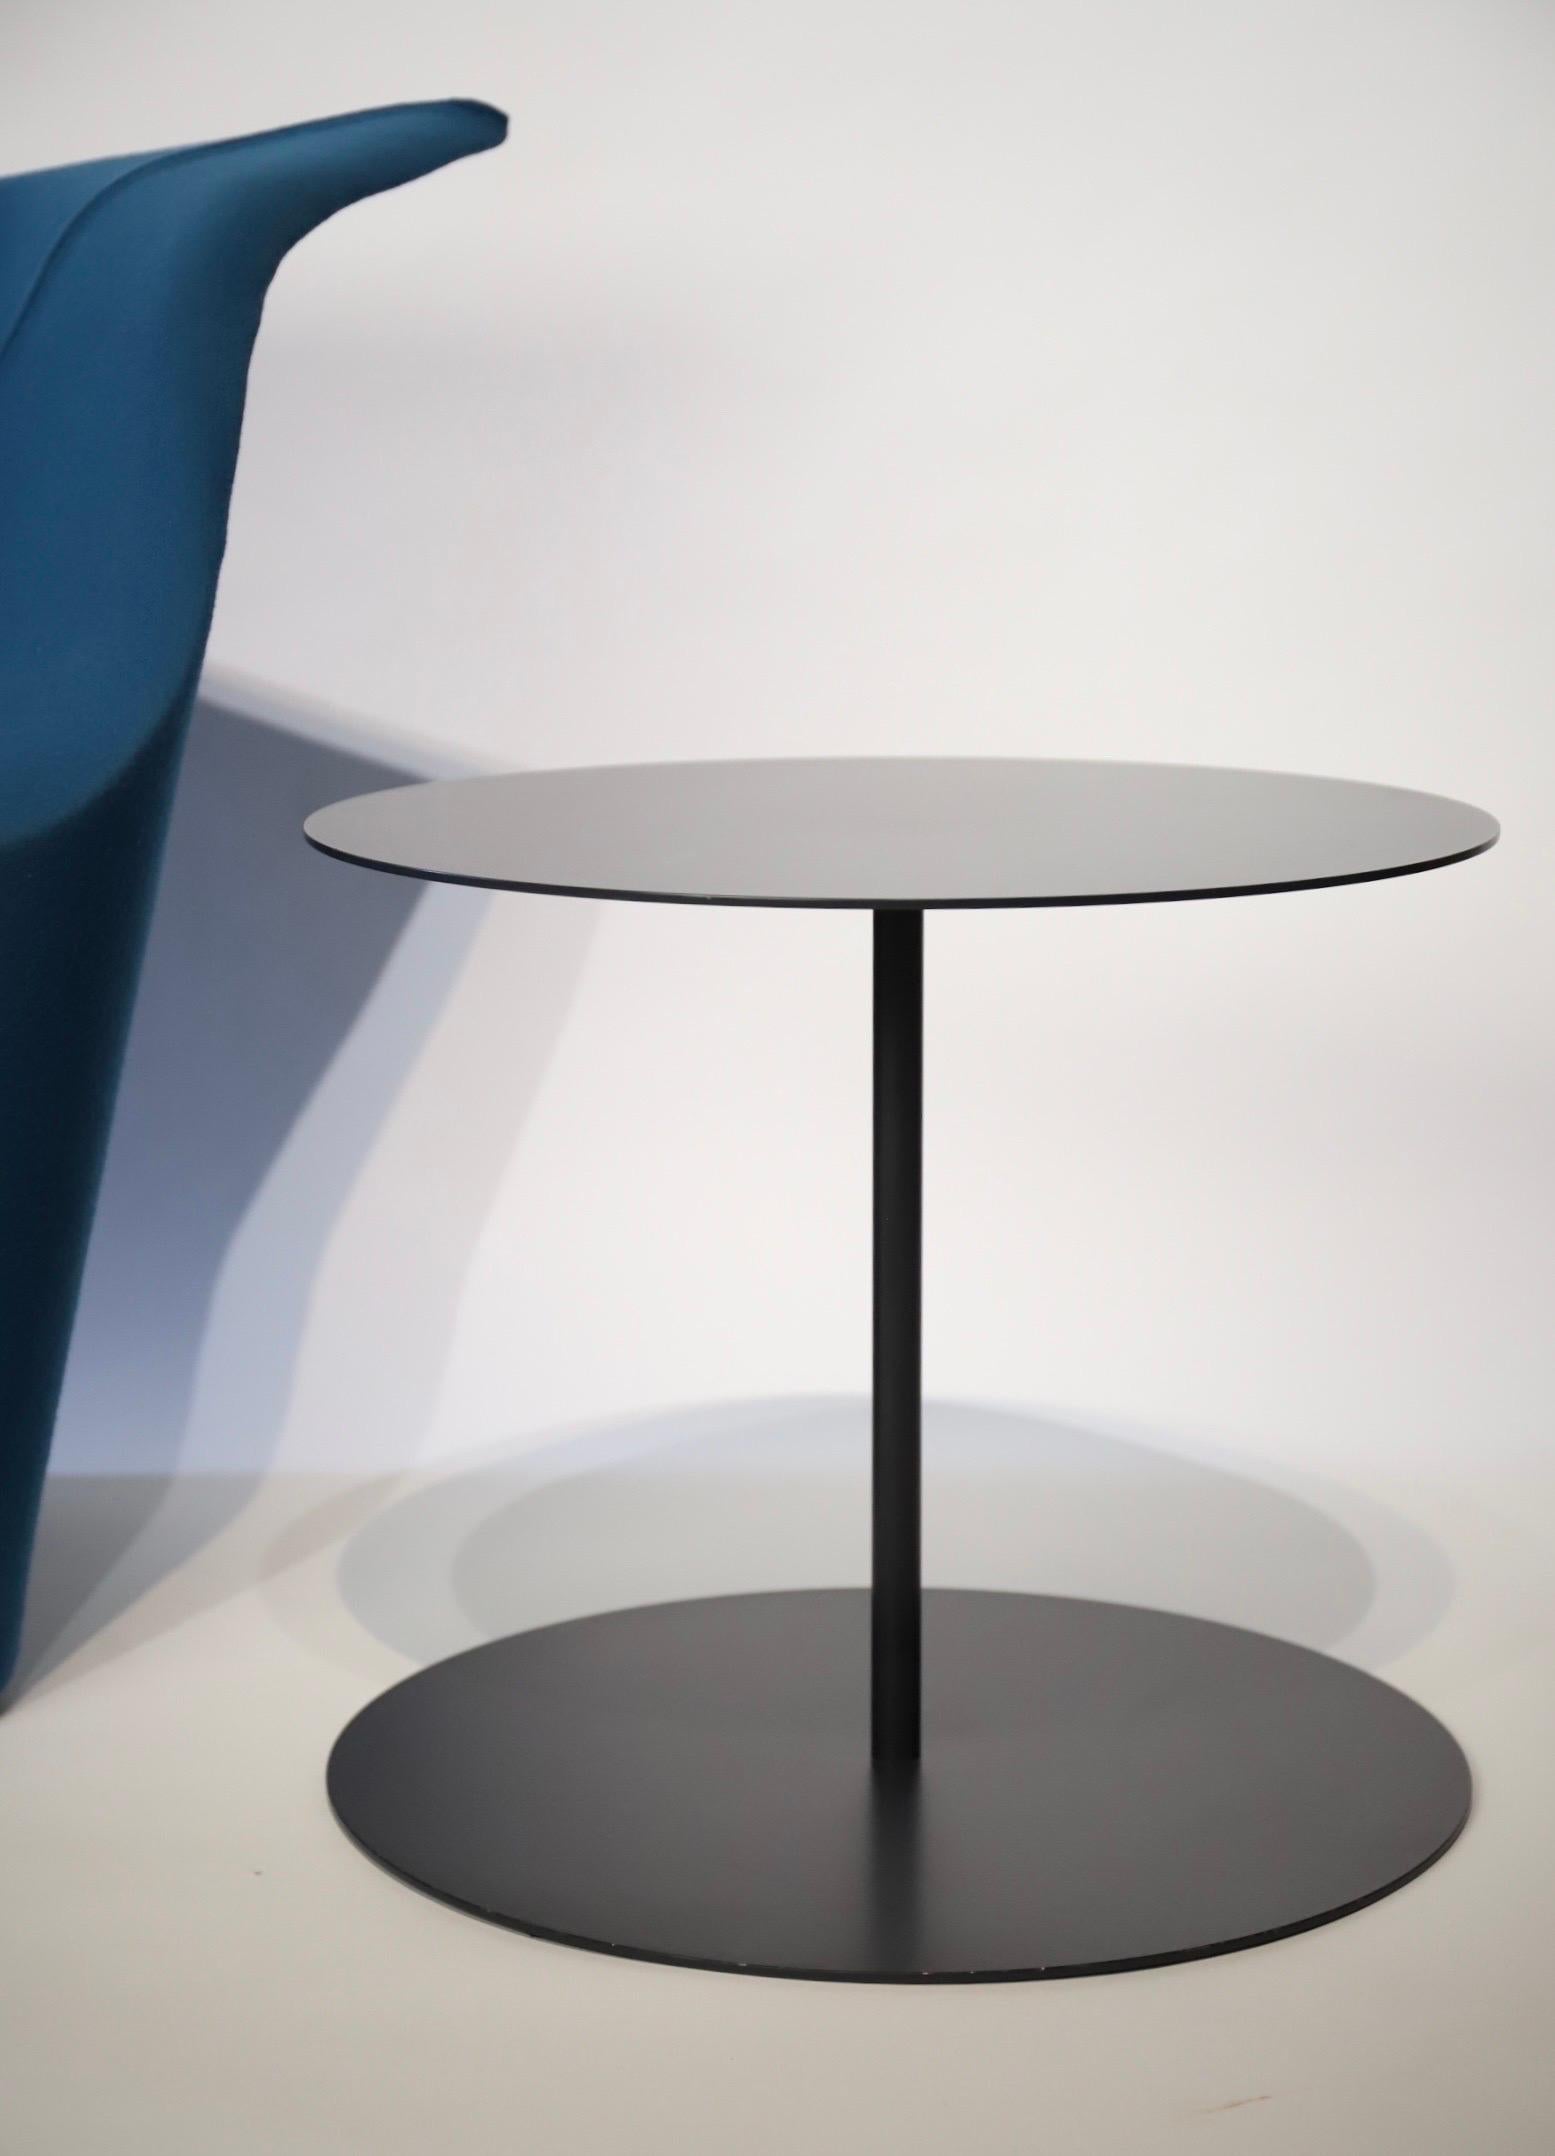 The gong table is a signature design by Giulio Cappellini. The round top is made of laser-cut sheet metal, connected to the base with a tubular iron leg. Great as an end table or a small single coffee table. Color is a dark blueish/grey black.